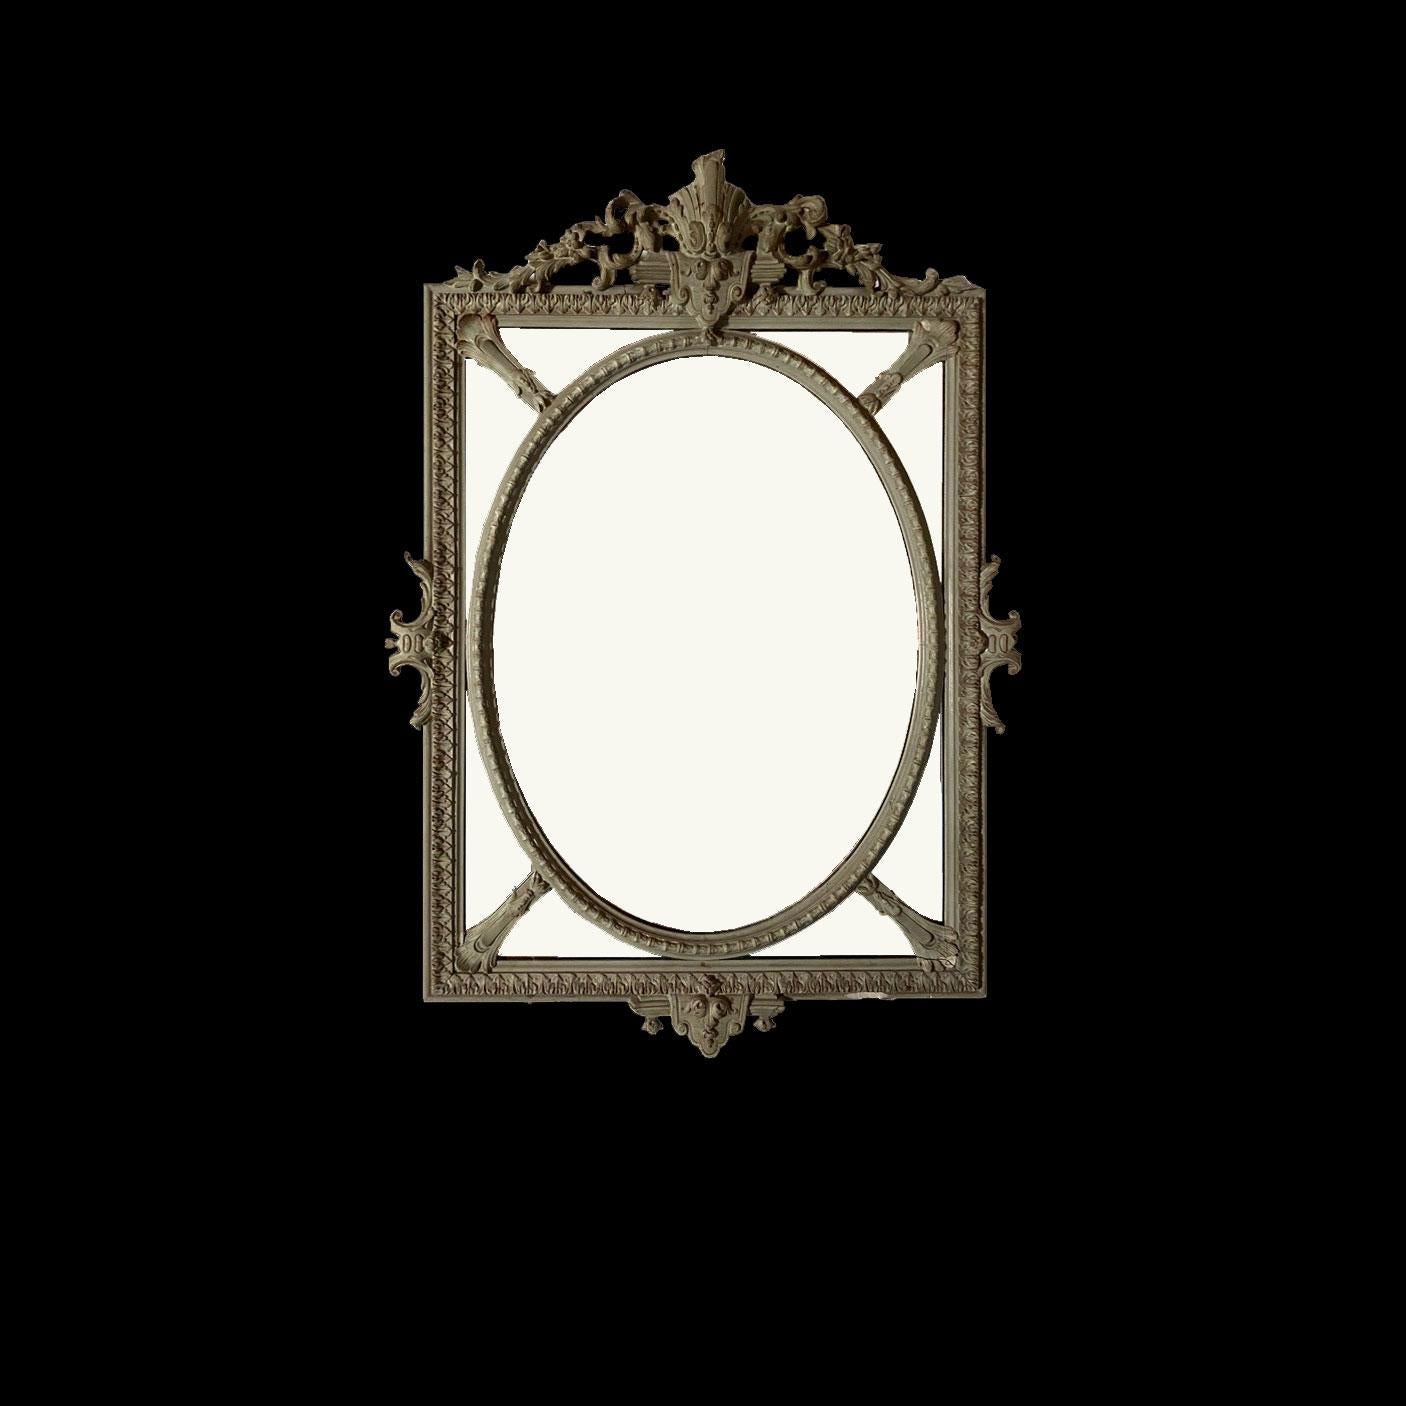 French Lacquered mirror Louis XV style Napoleon3 period For Sale